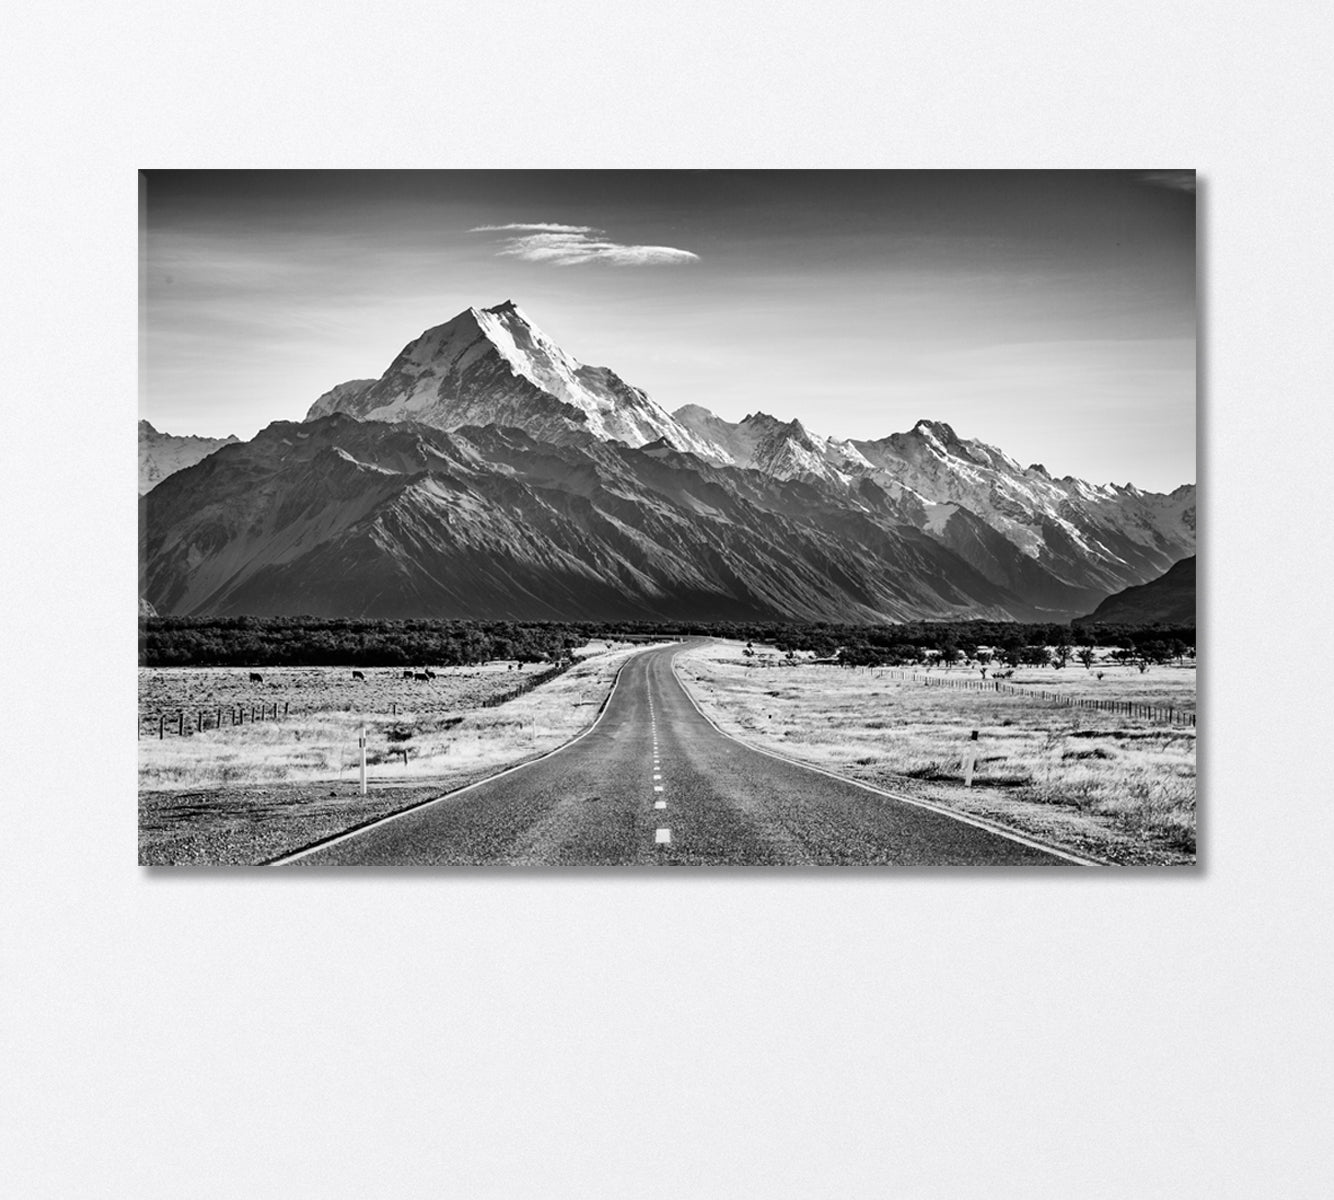 Road Leading Towards a Large Snow Capped Mountain Canvas Print-Canvas Print-CetArt-1 Panel-24x16 inches-CetArt